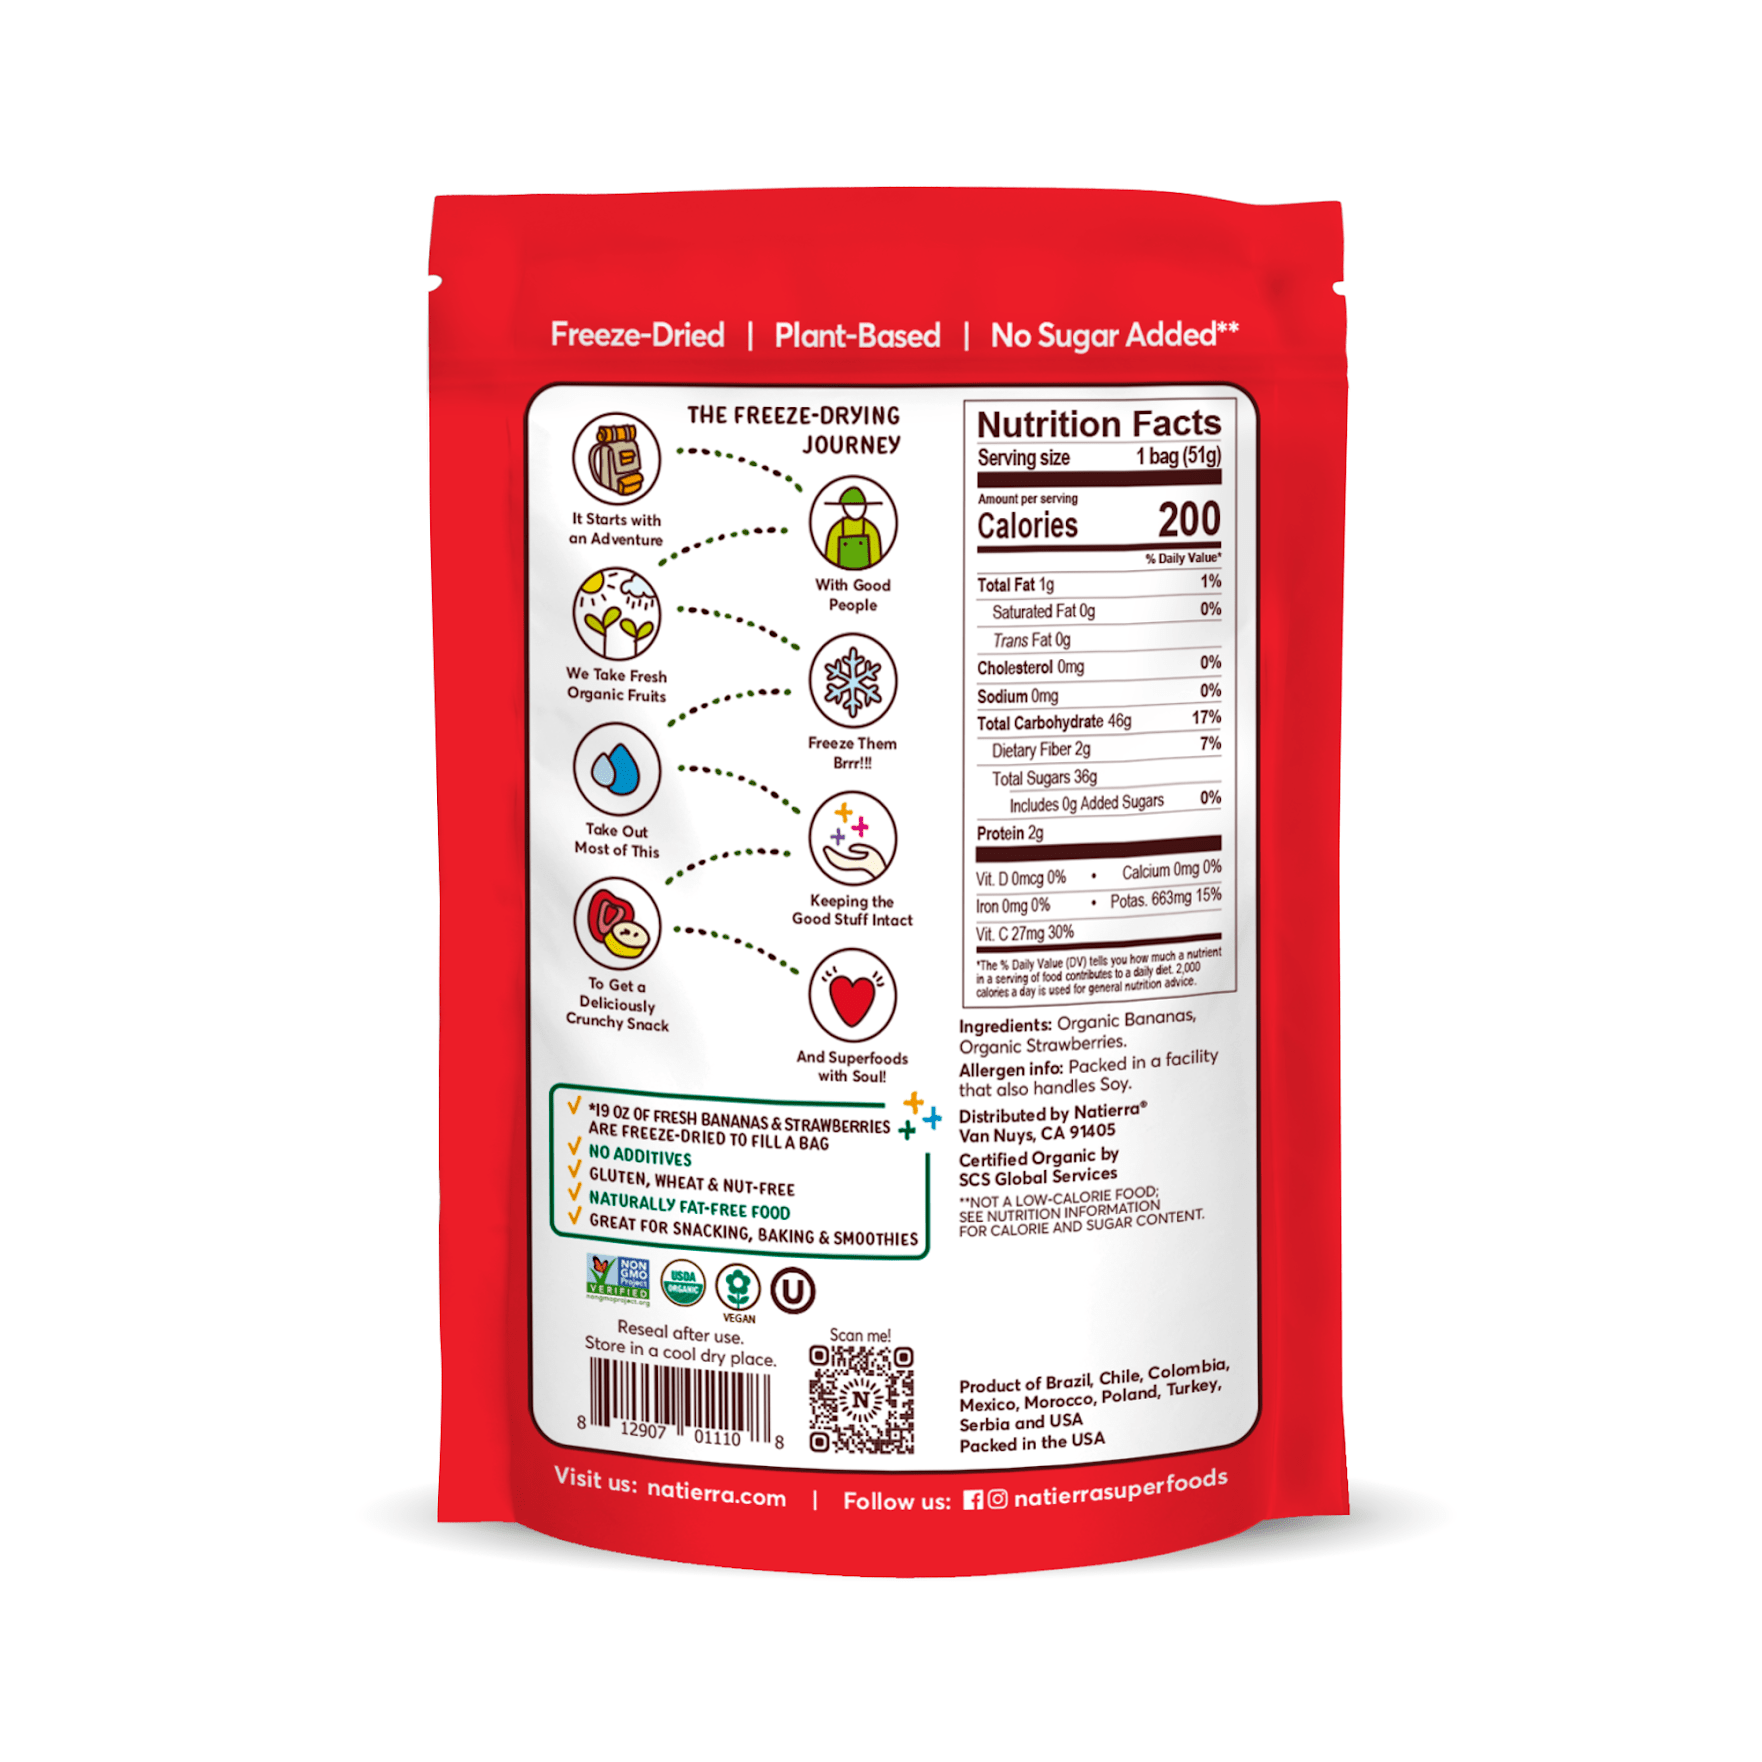 Natierra Freeze-Dried Bananas and Strawberries nutritional facts